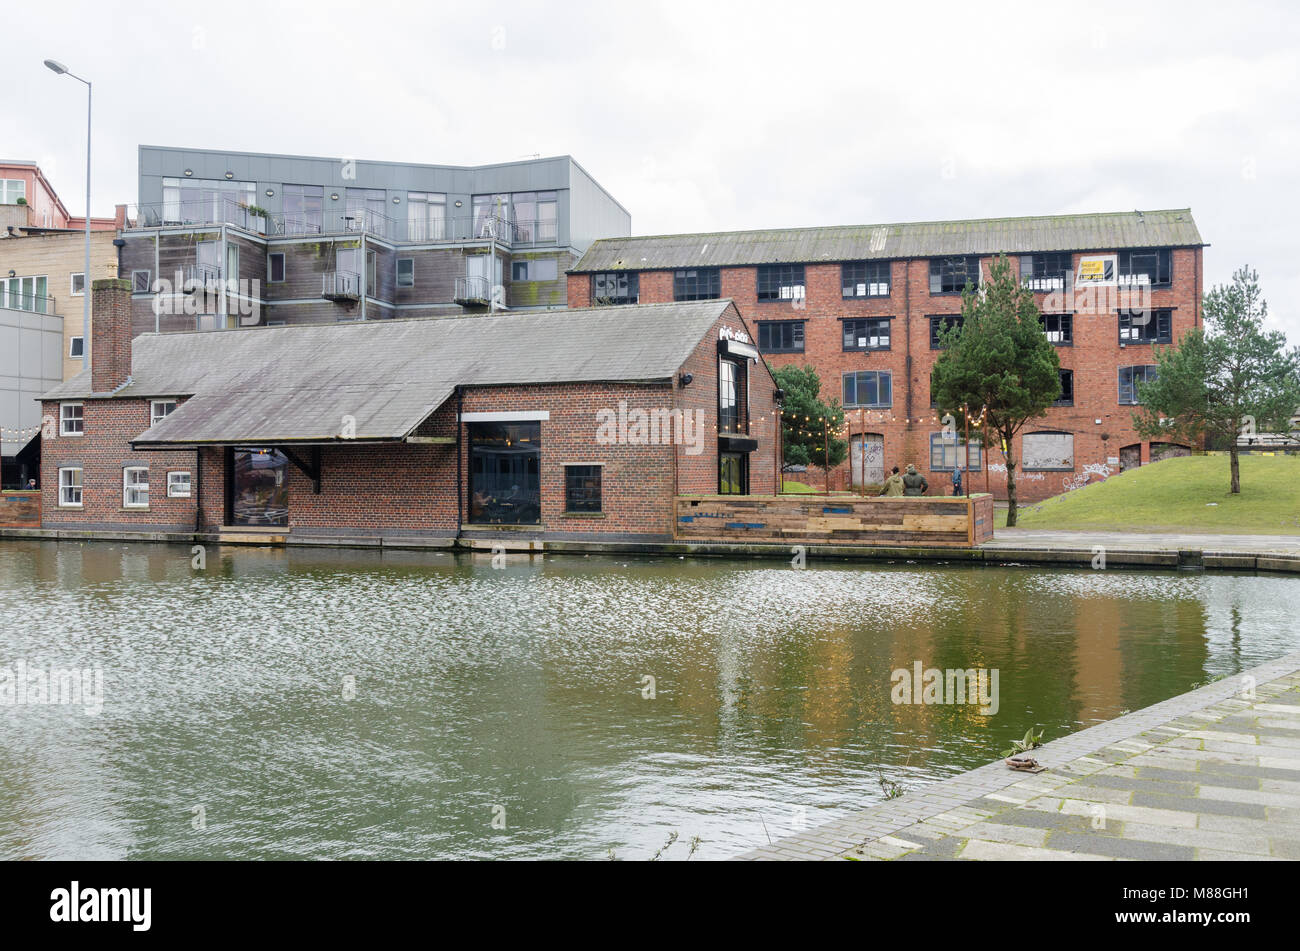 Old industrial warehouses in Gallery Square overlooking the Walsall Canal Basin in the industrial town of Walsall in the West Midlands Stock Photo